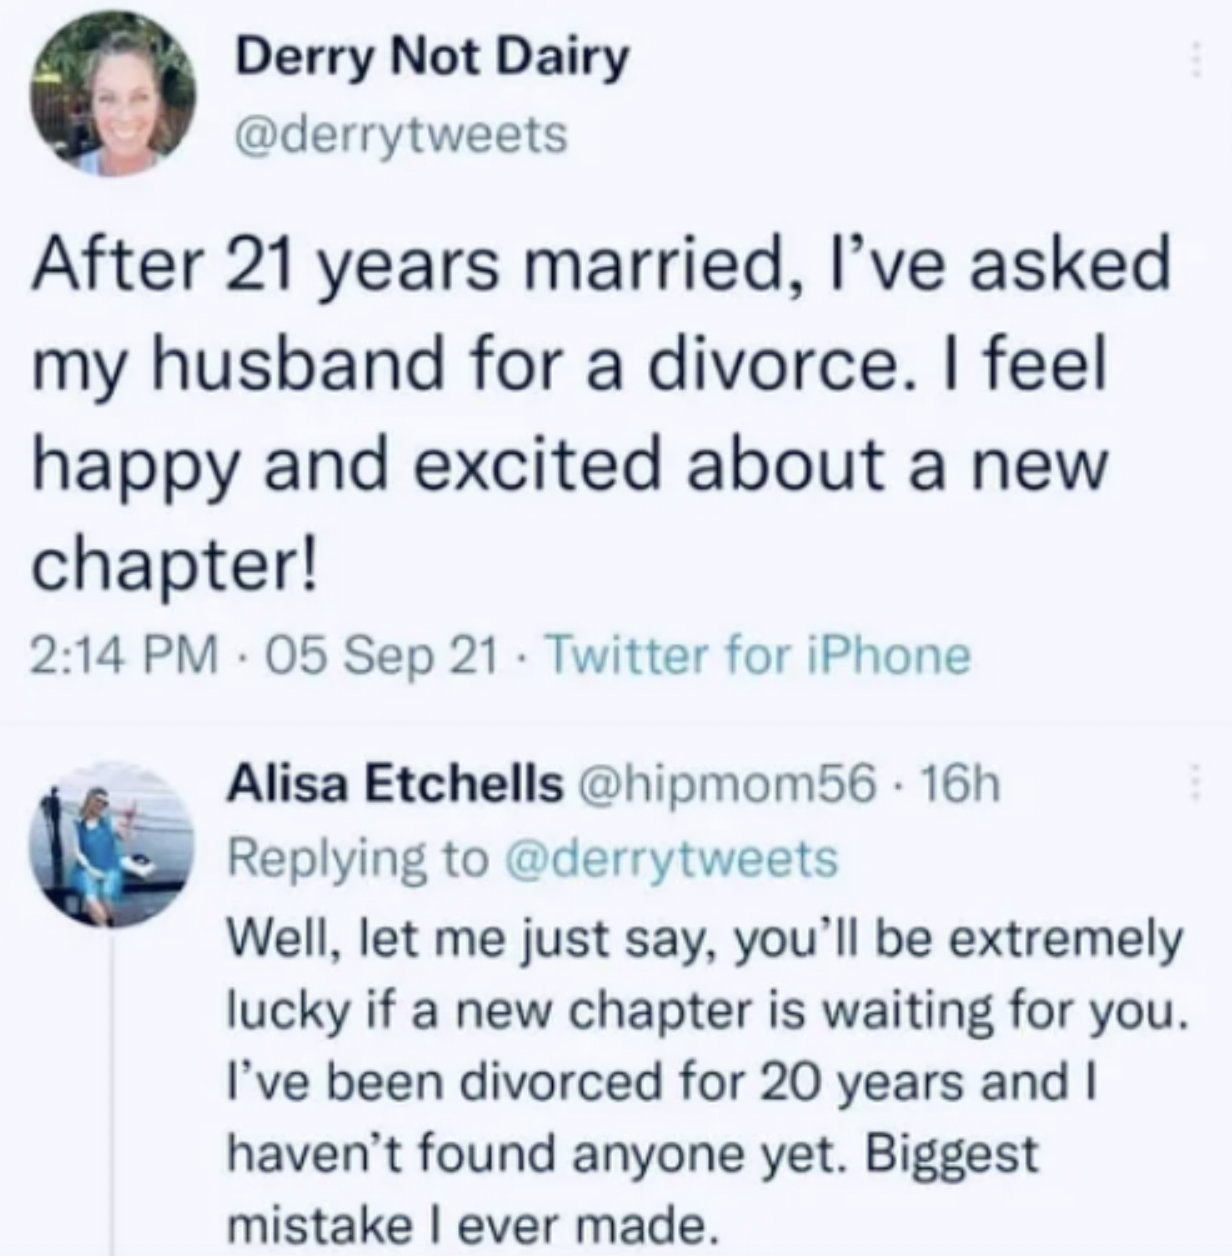 cringe pics - paper - Derry Not Dairy After 21 years married, I've asked my husband for a divorce. I feel happy and excited about a new chapter! 05 Sep 21 Twitter for iPhone Alisa Etchells 16h Well, let me just say, you'll be extremely lucky if a new chap